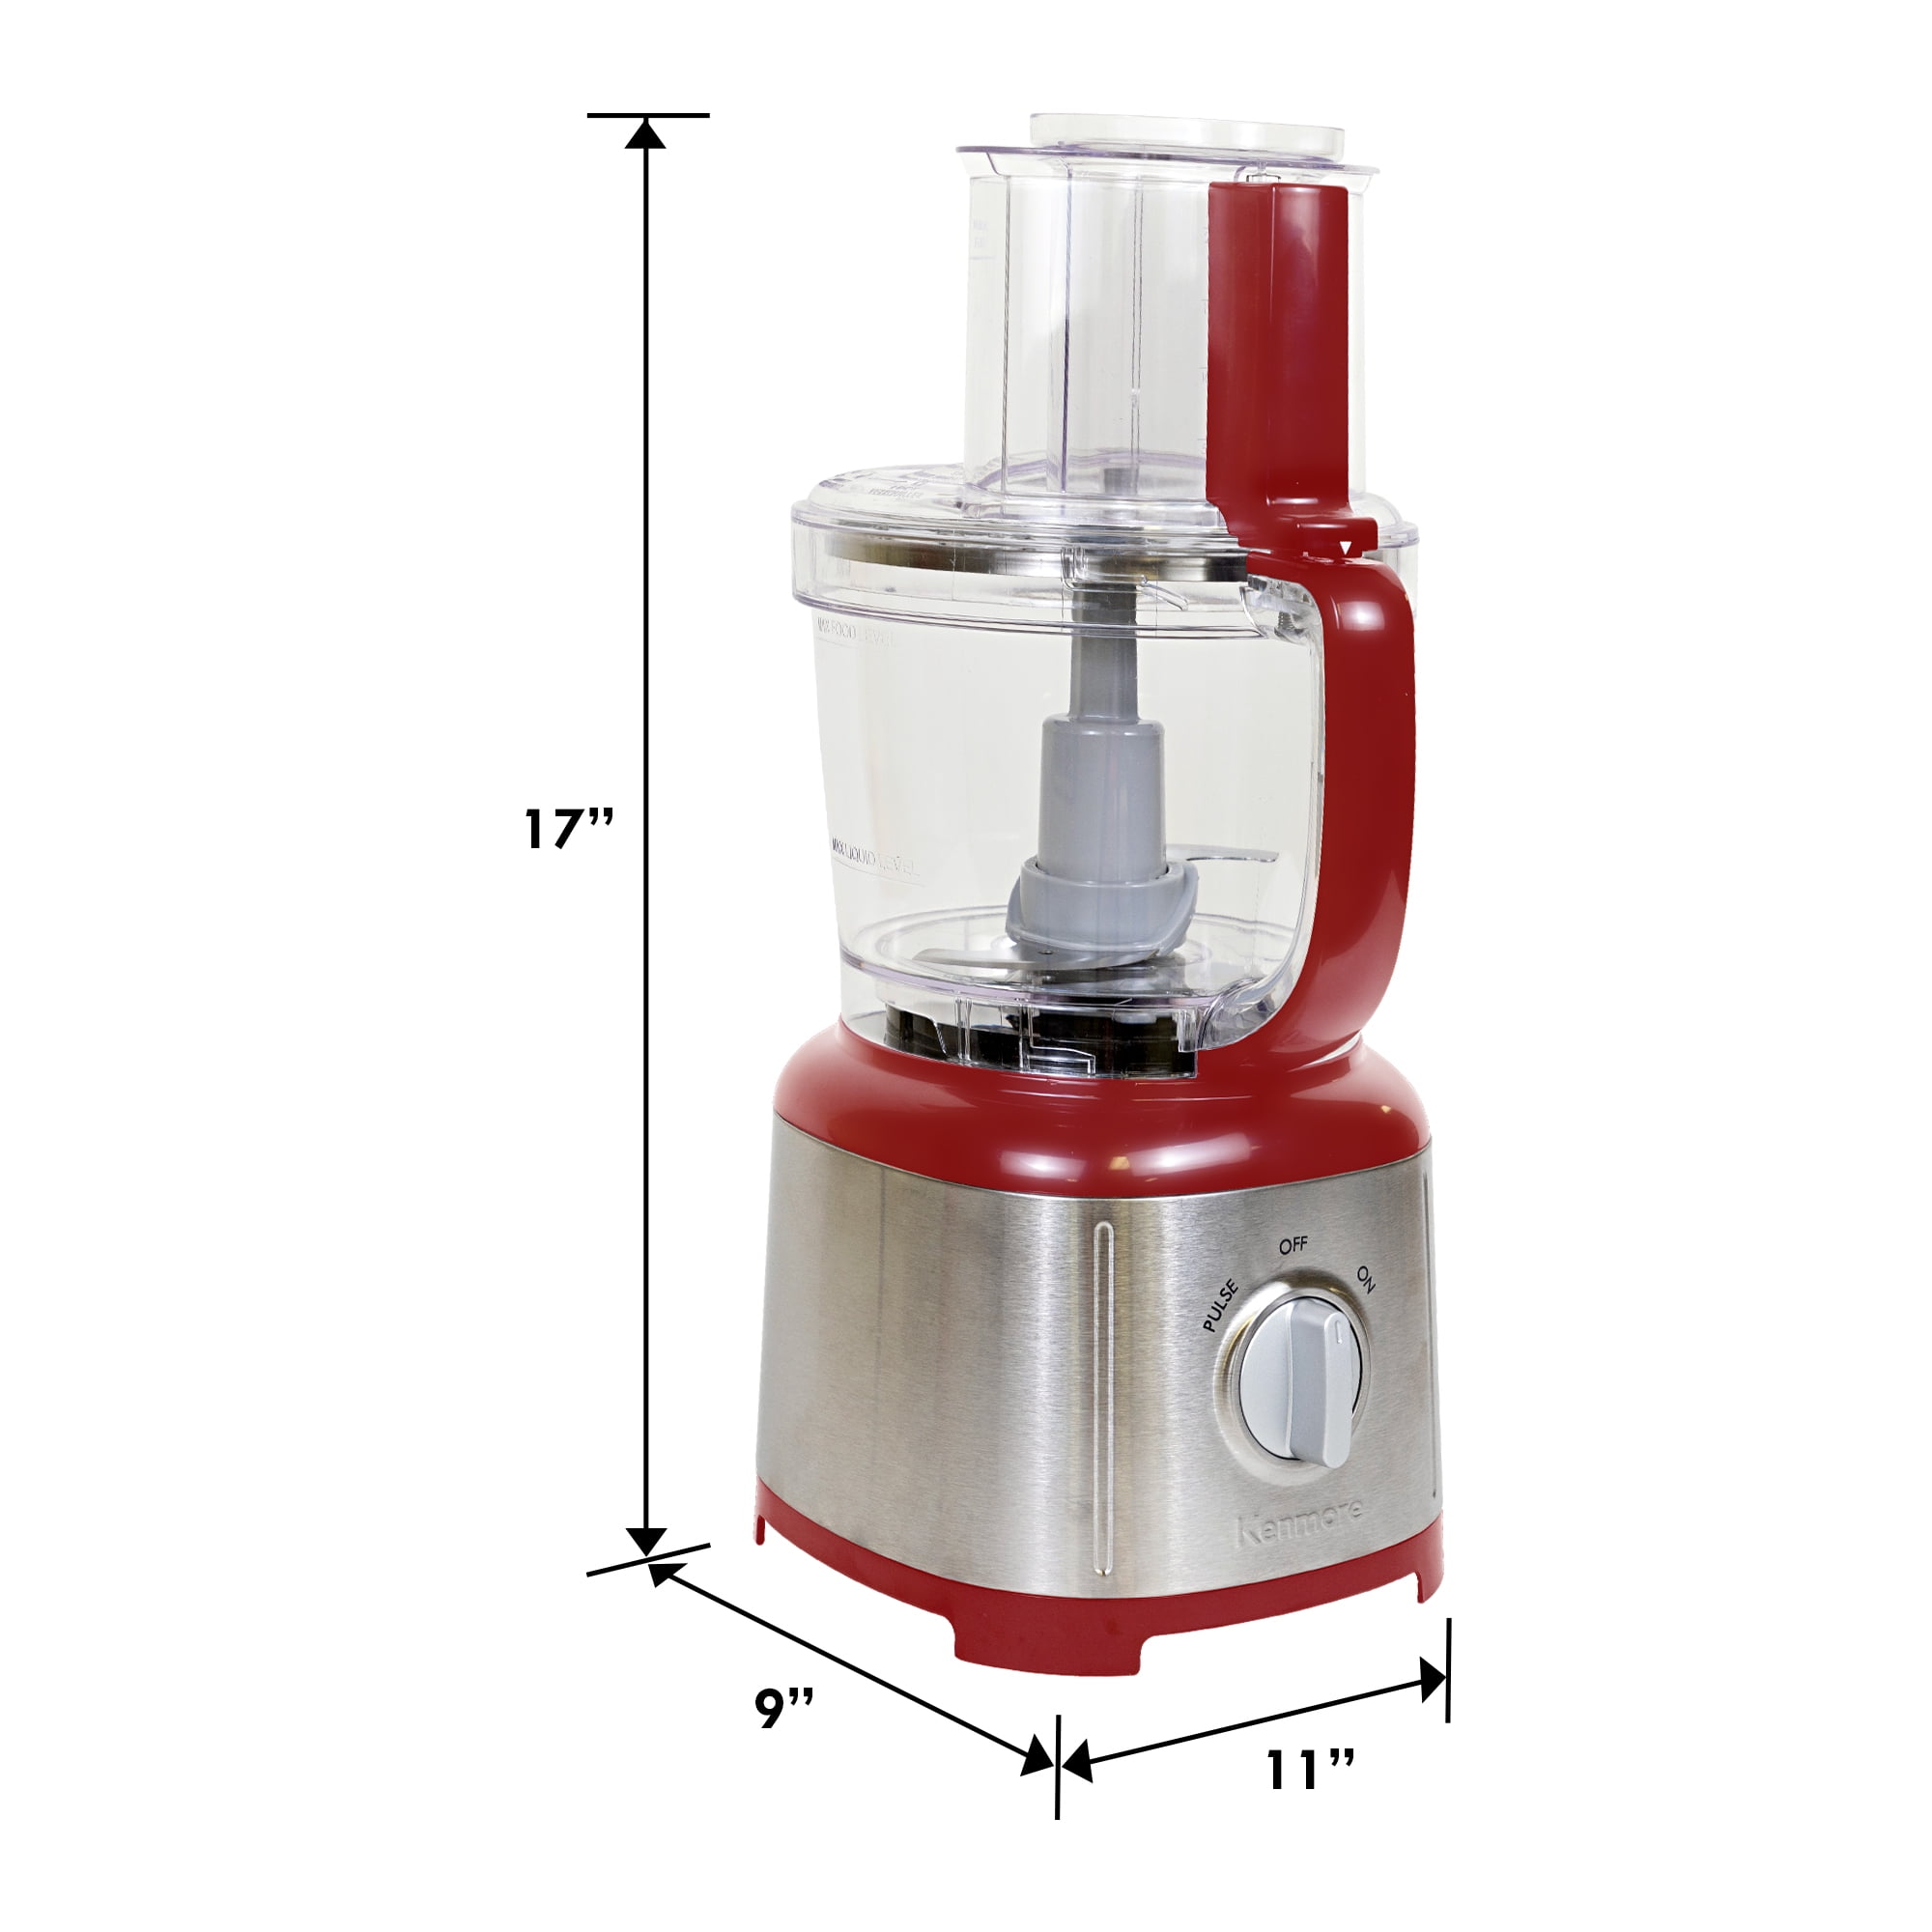 Kenmore 414302 11-Cup Food Processor - Red